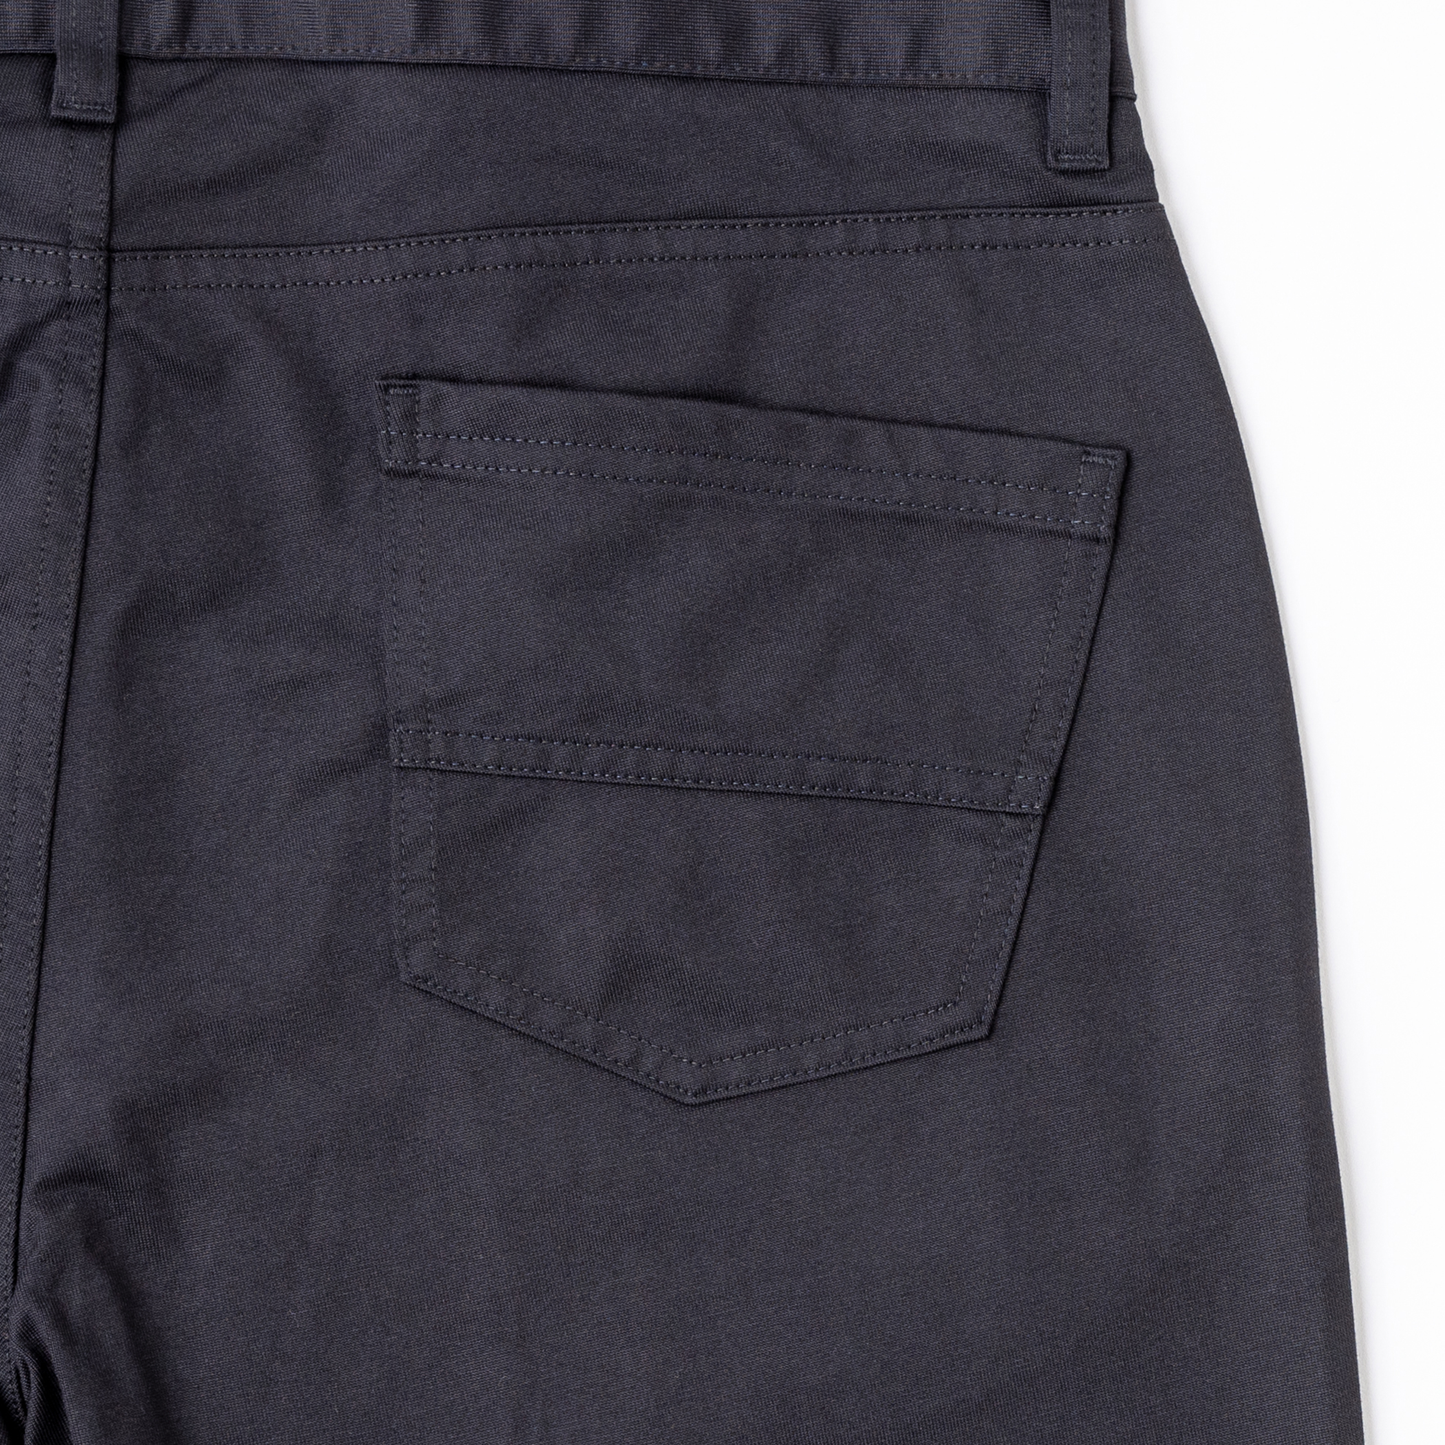 Comfort Knit Five-Pocket Pant - Available in 4 Colors